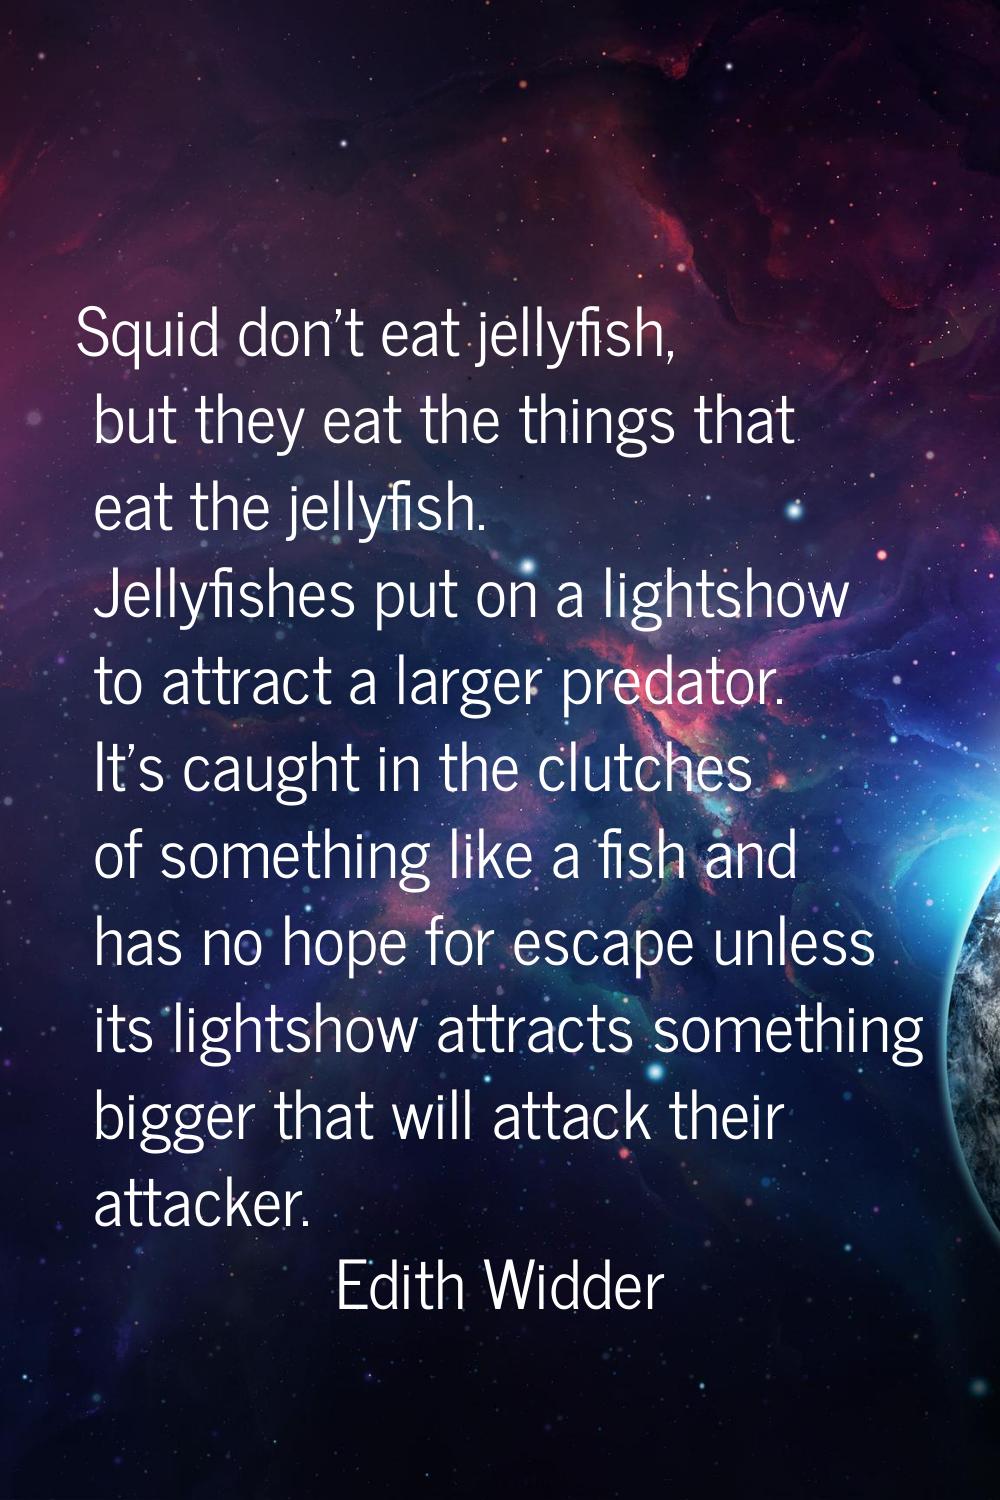 Squid don't eat jellyfish, but they eat the things that eat the jellyfish. Jellyfishes put on a lig